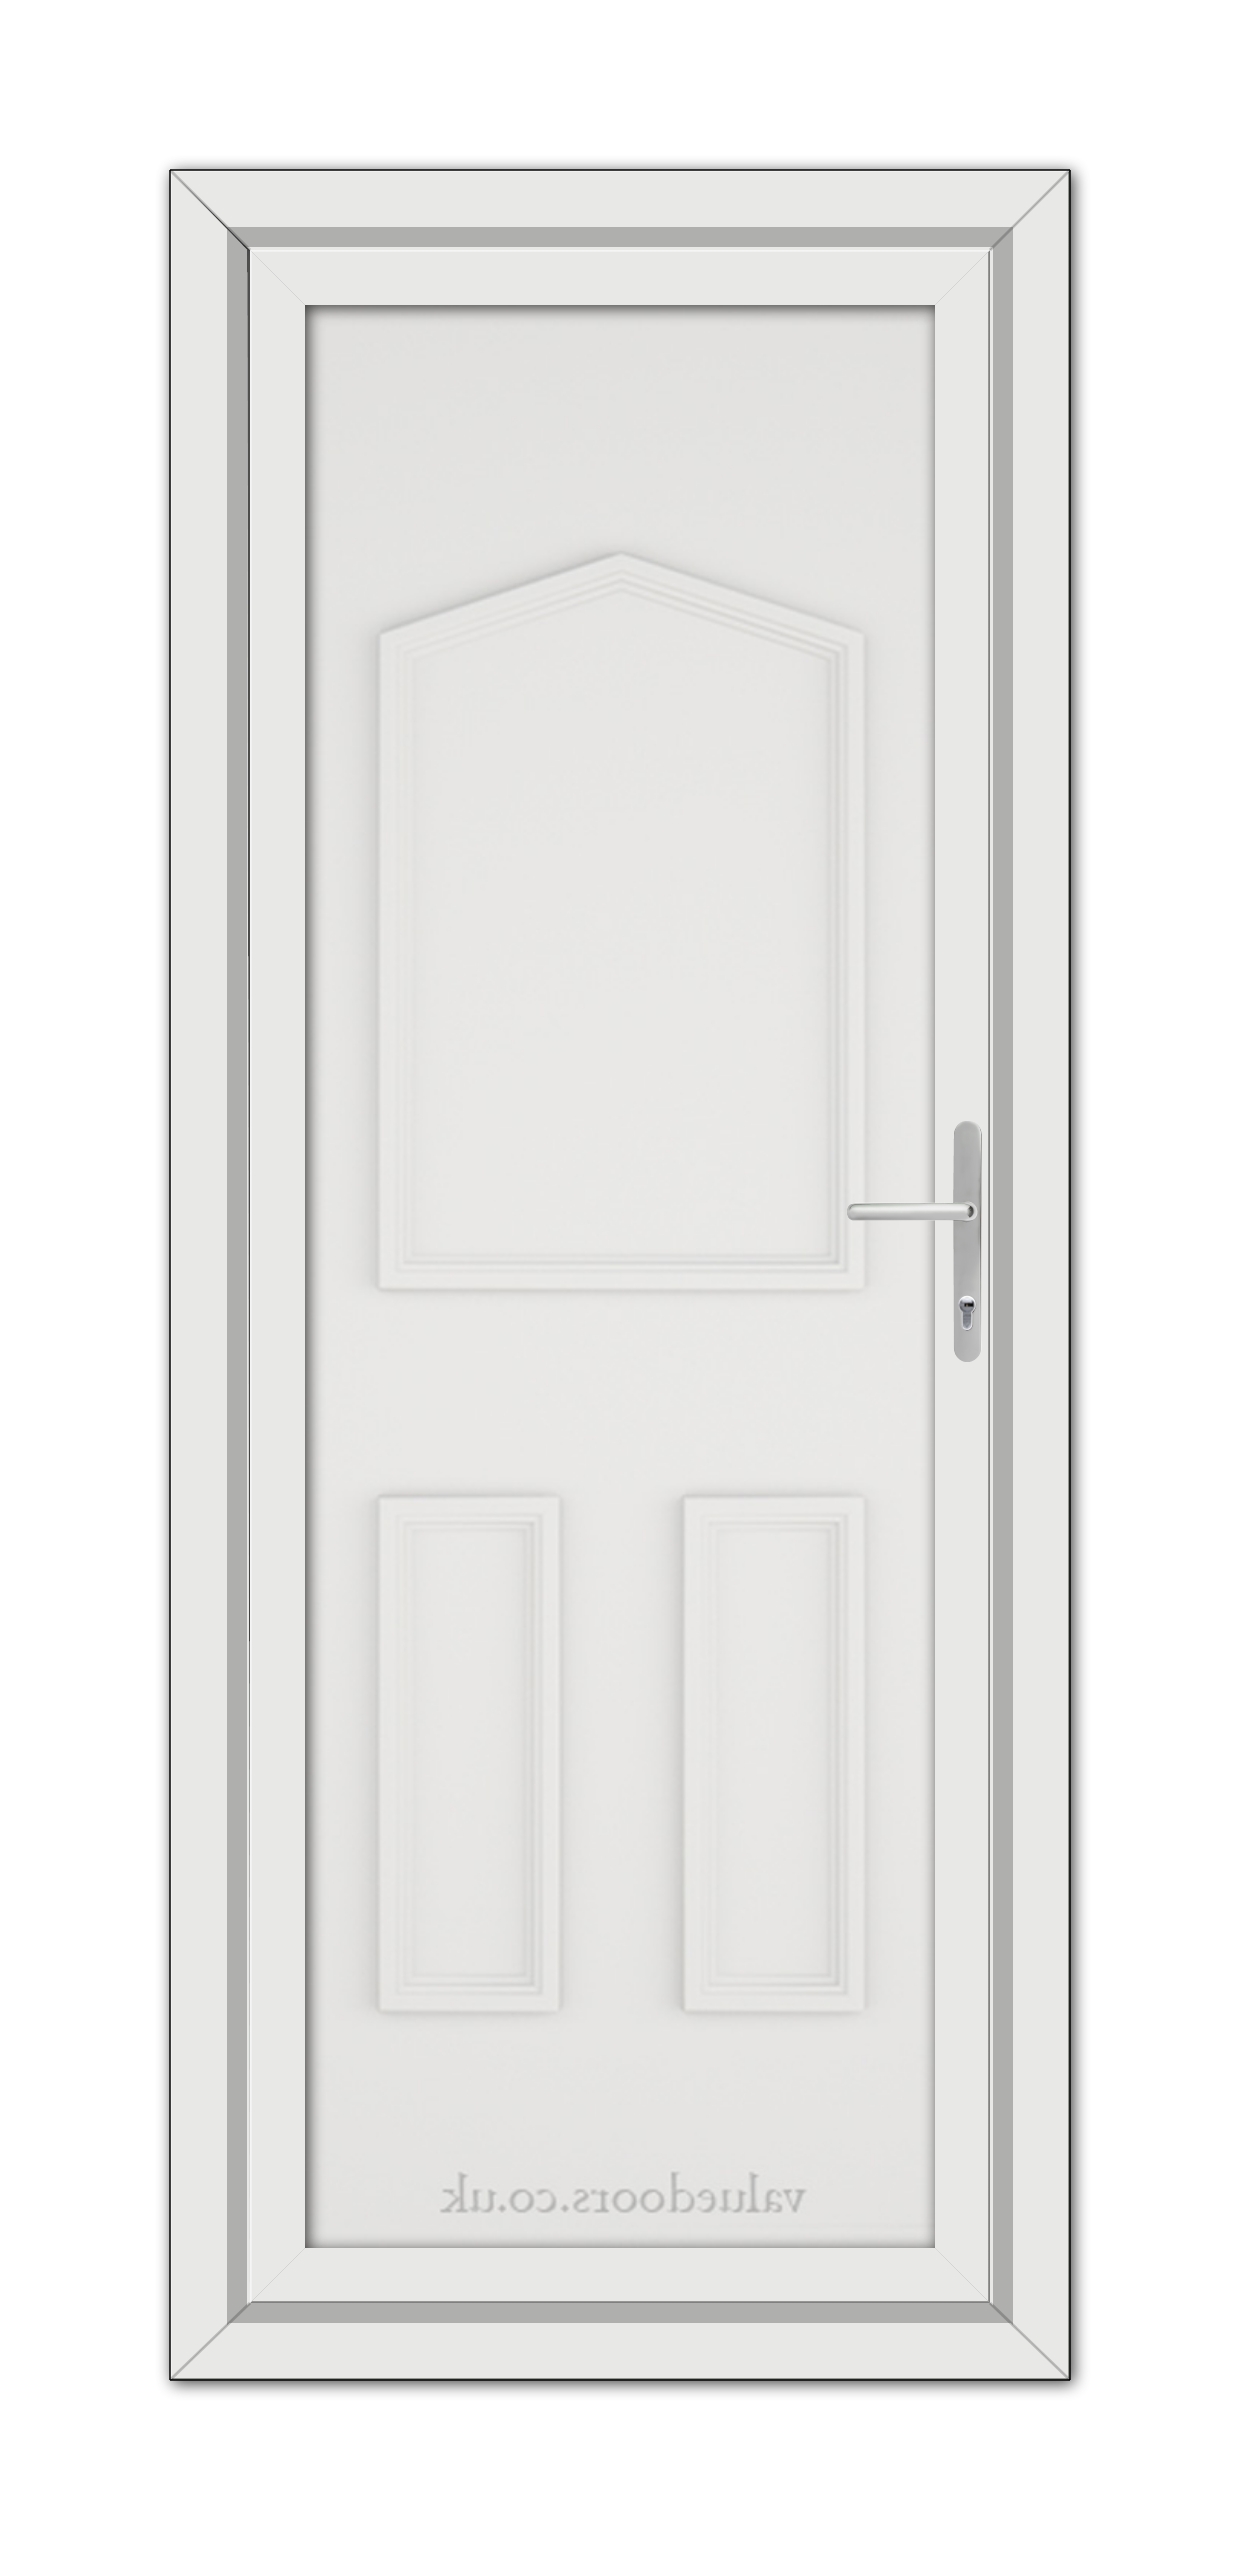 A vertical image of a closed White Oxford Solid uPVC Door with a silver handle, featuring a simple, elegant panel design set within a narrow frame.